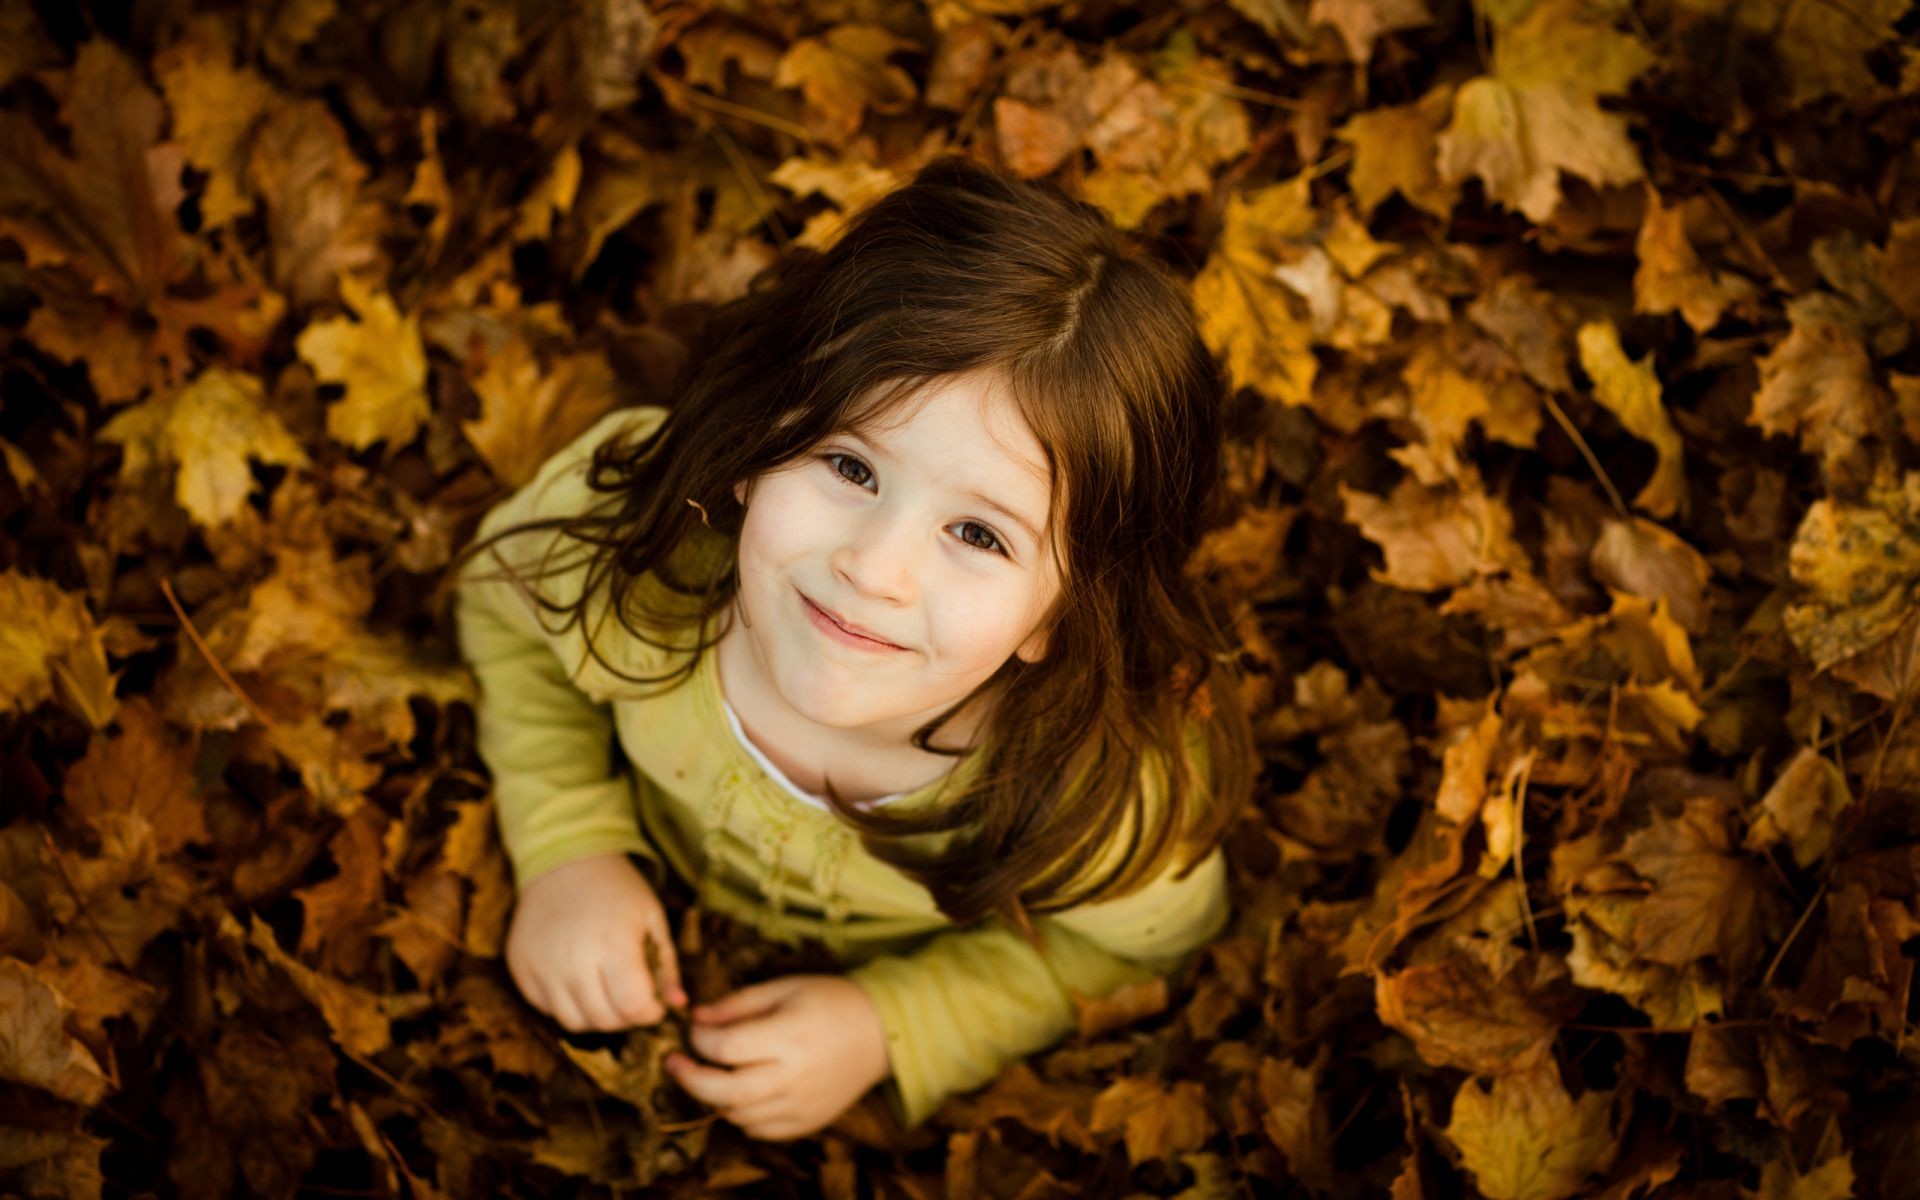 laughing children fall nature girl leaf wood maple park beautiful portrait one face tree light fashion outdoors model cute smile